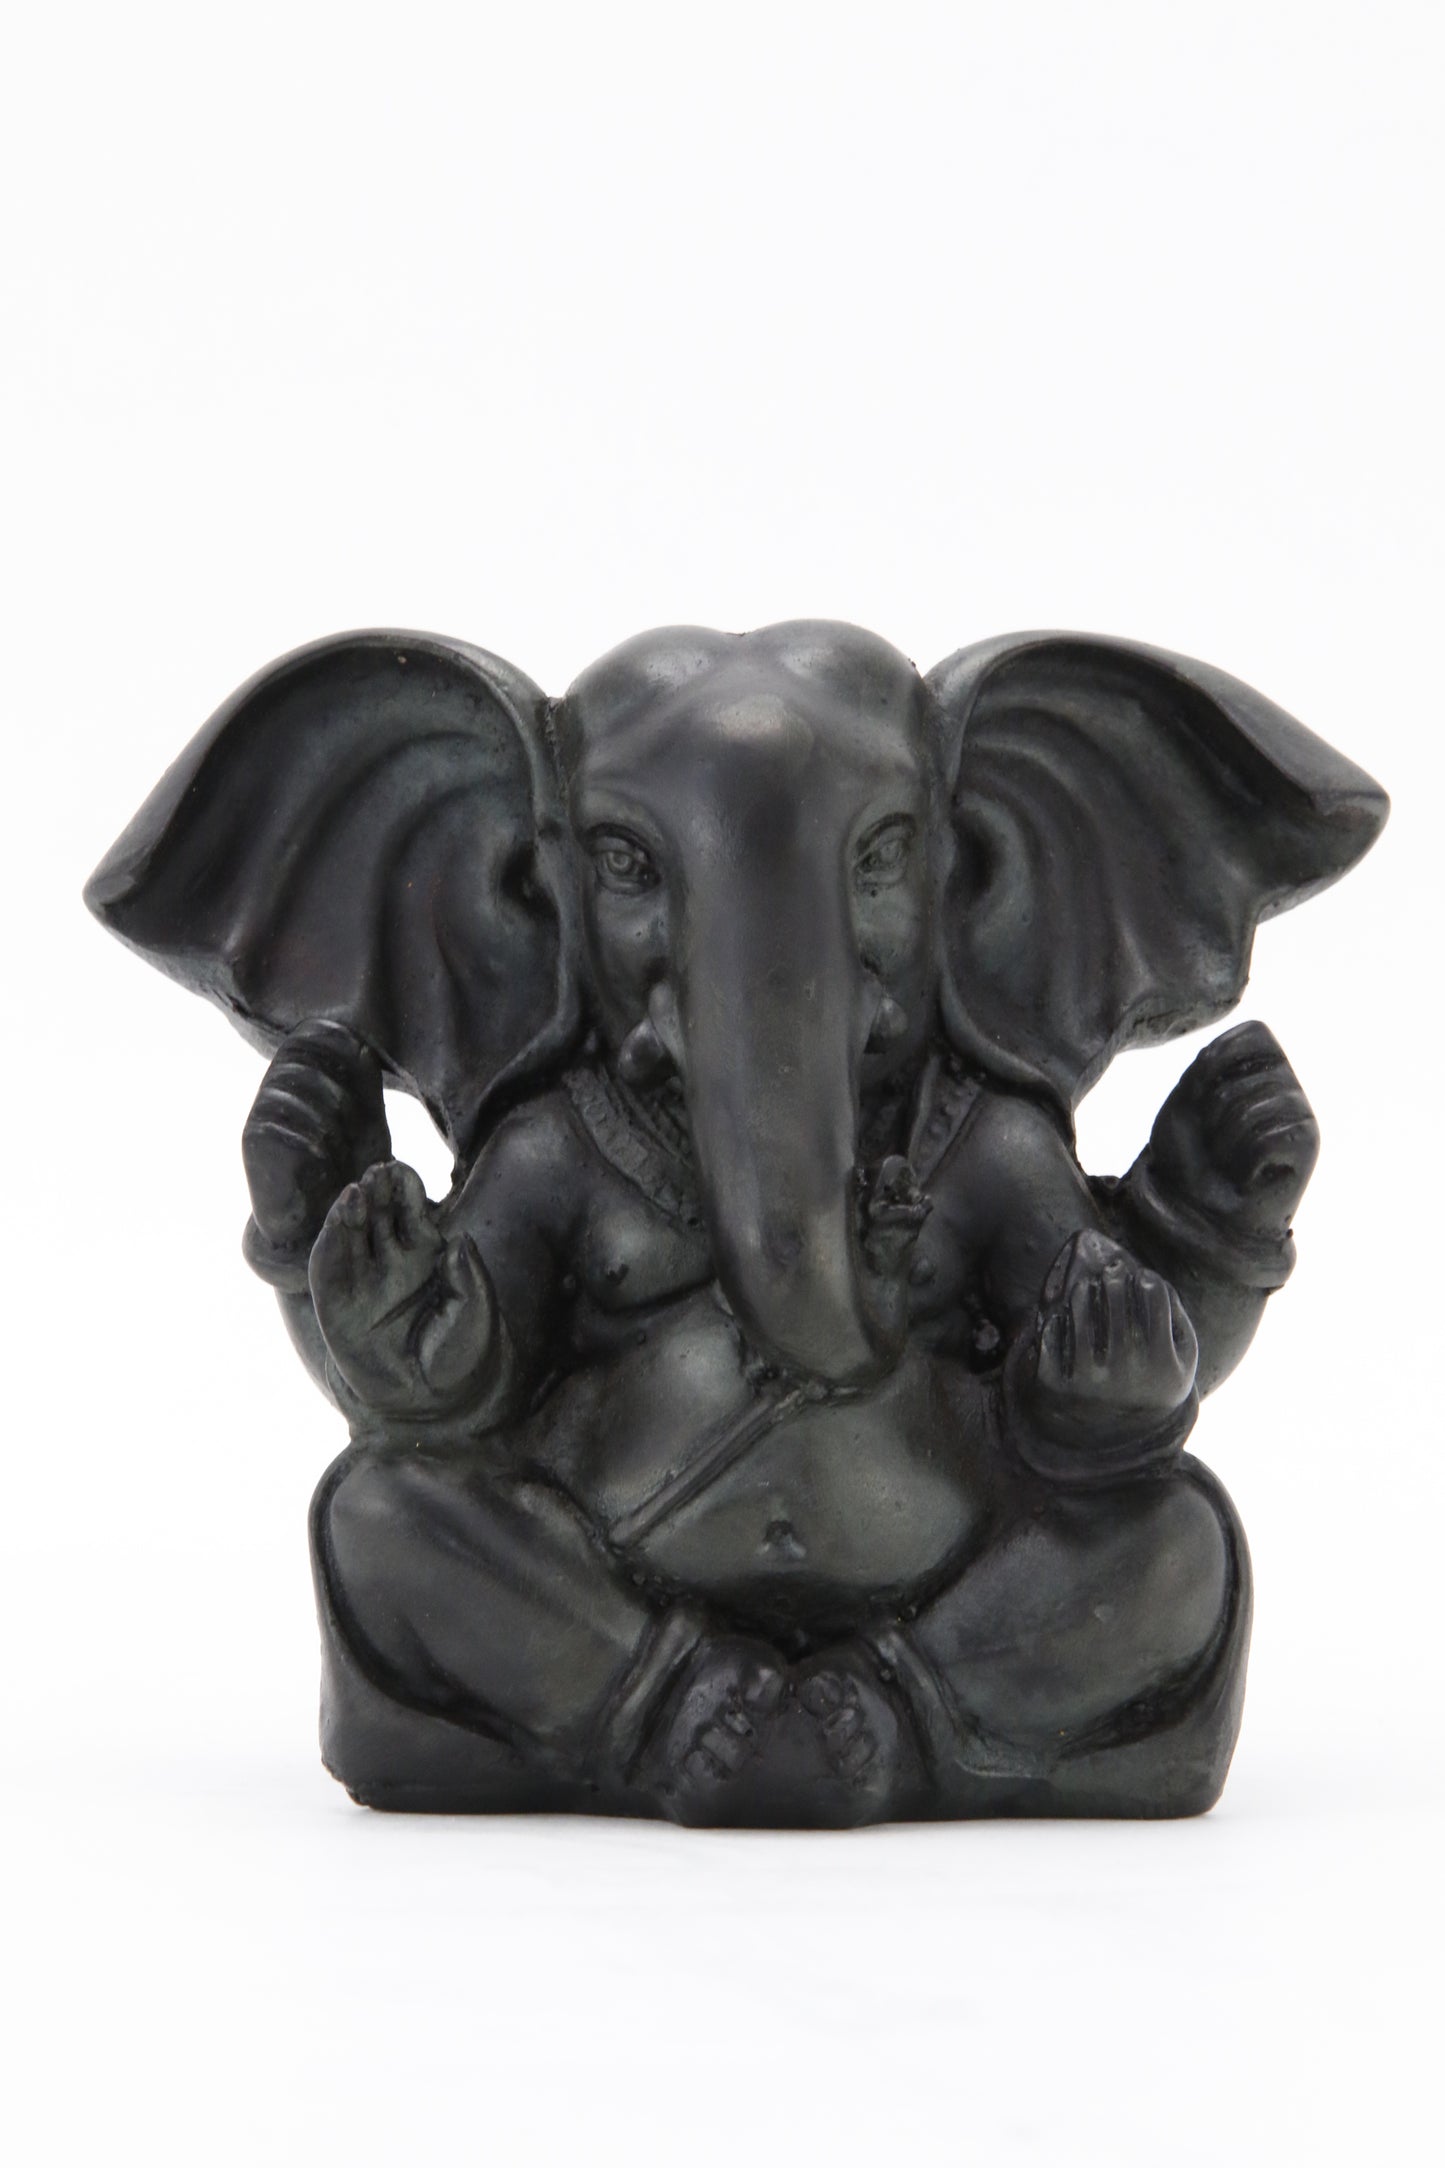 GANESHA BALD POINTY EARS STATUE DARK LARGE FRONT VIEW